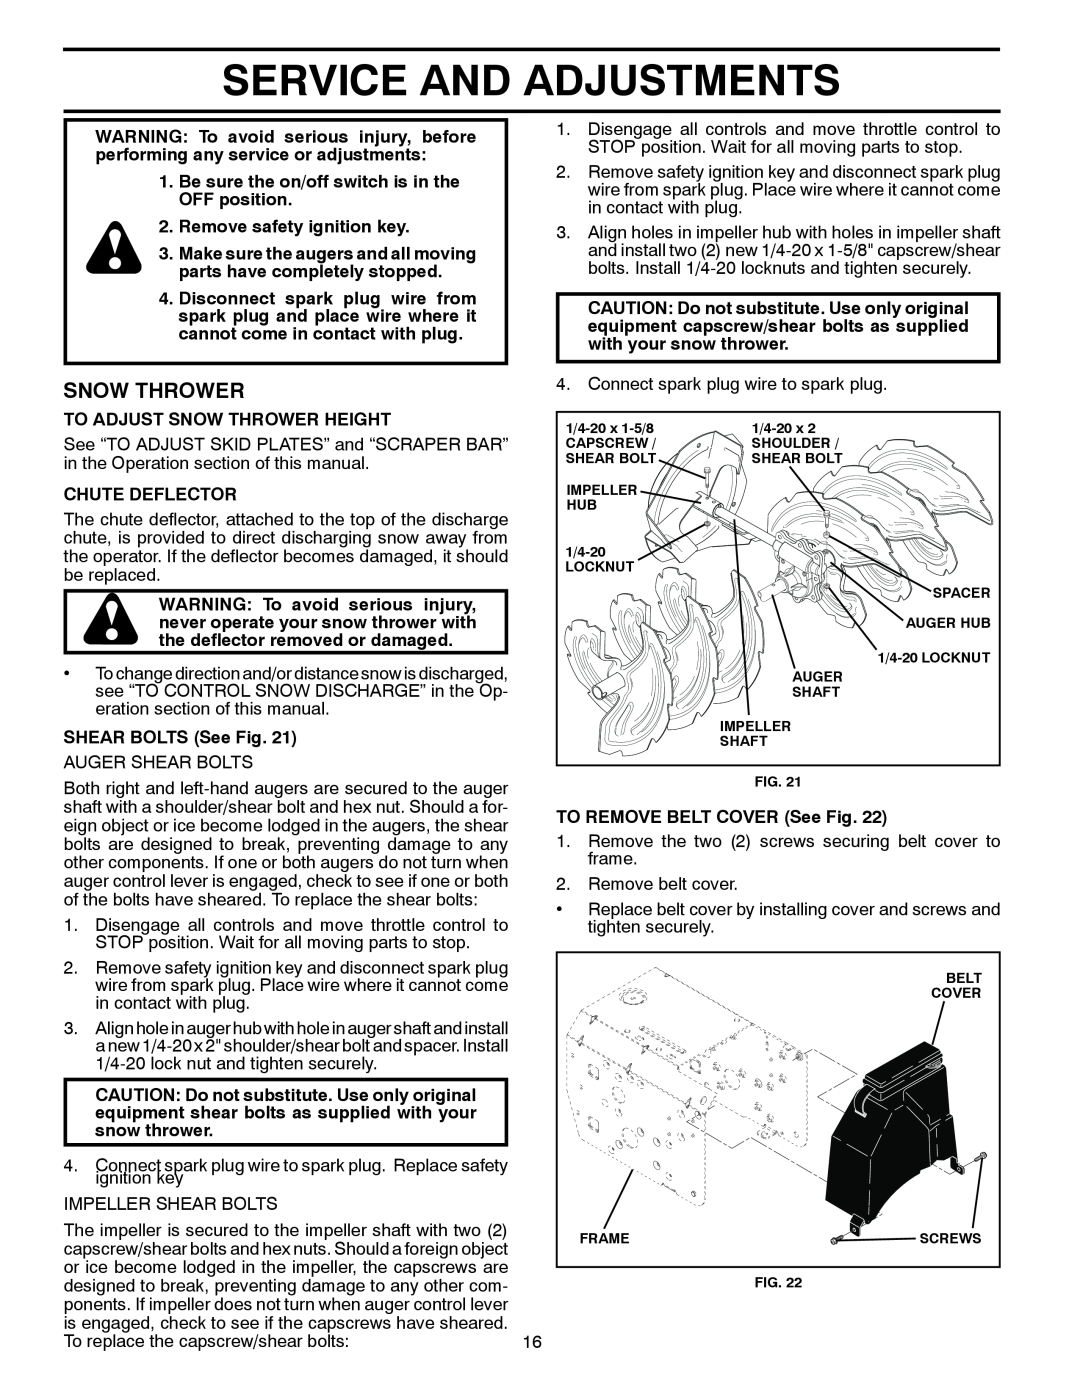 Husqvarna 10527SB-LS owner manual Service And Adjustments, Snow Thrower, Be sure the on/off switch is in the OFF position 